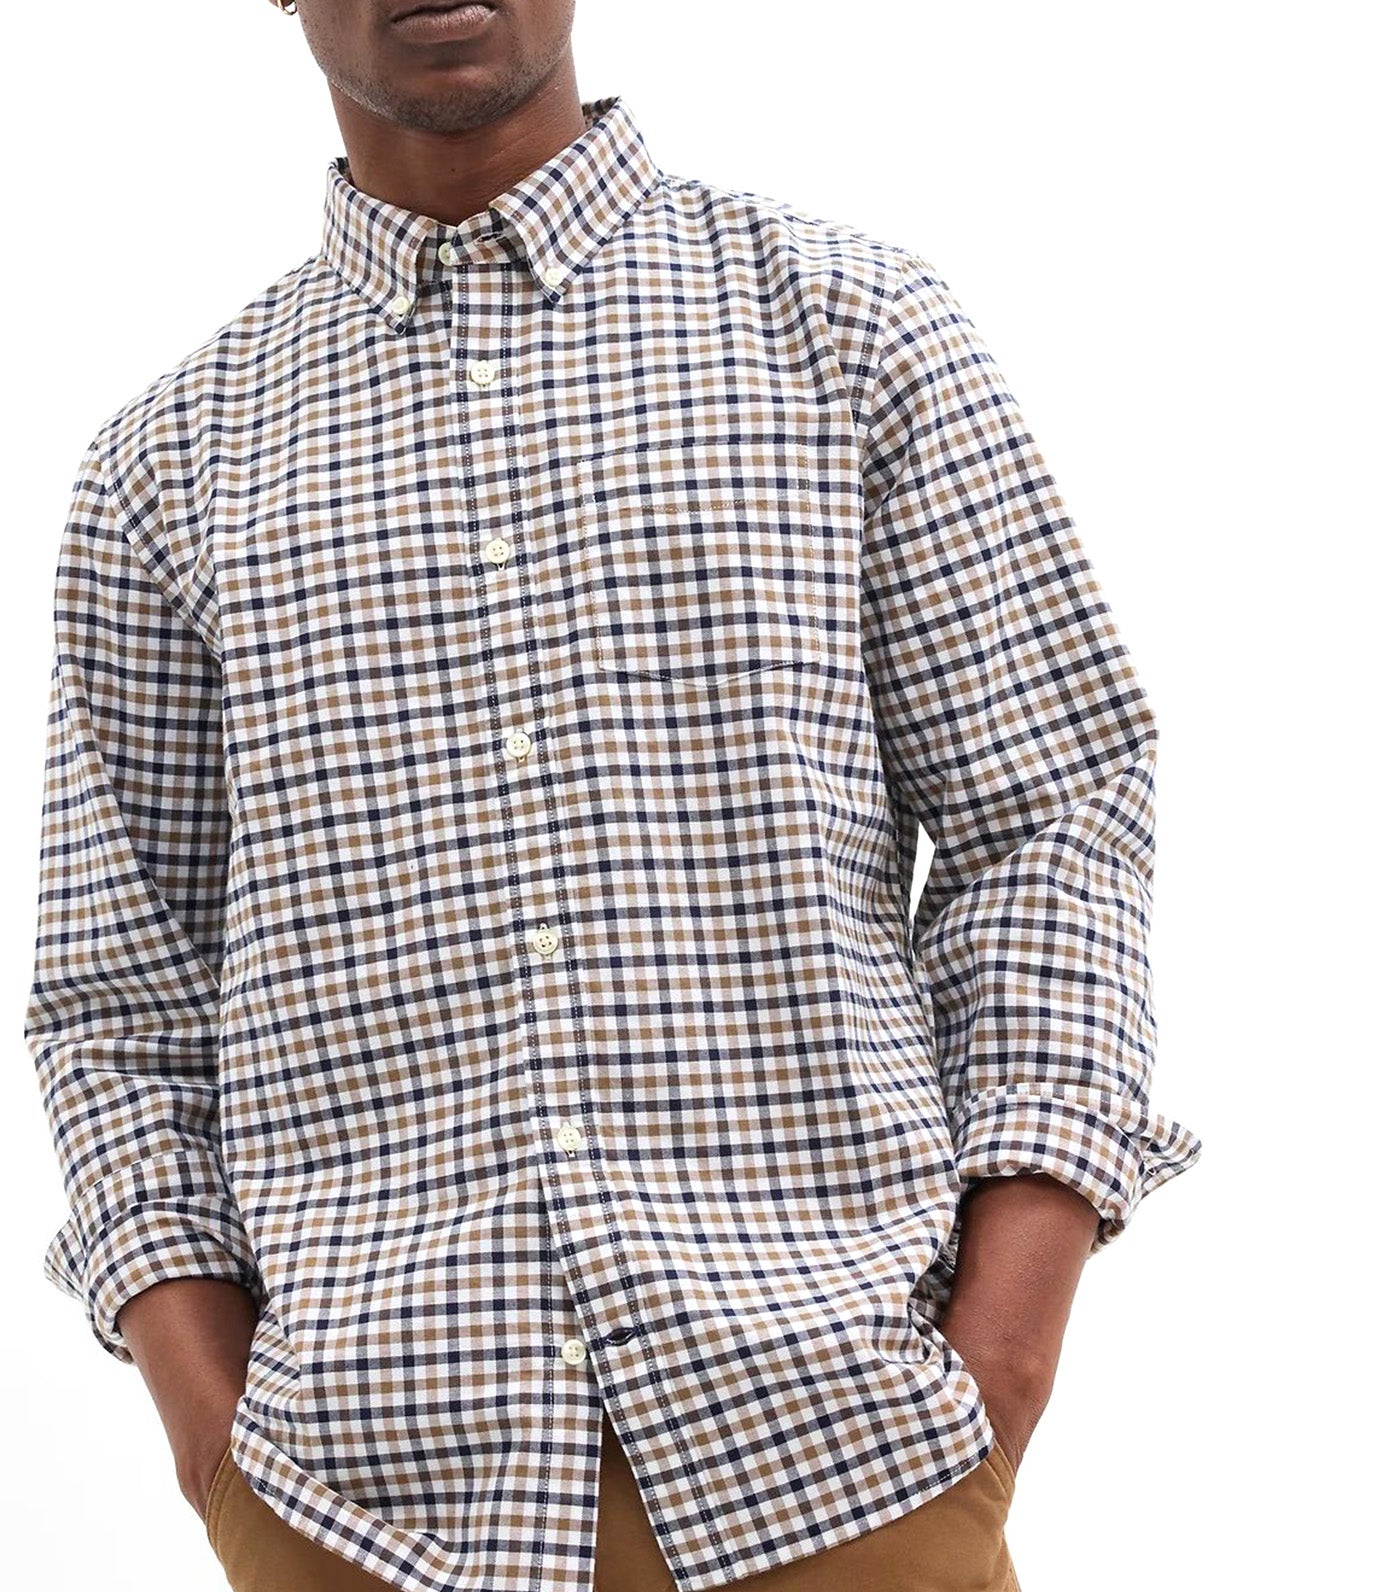 Oxford Shirt in Standard Fit Brown Navy Plaid